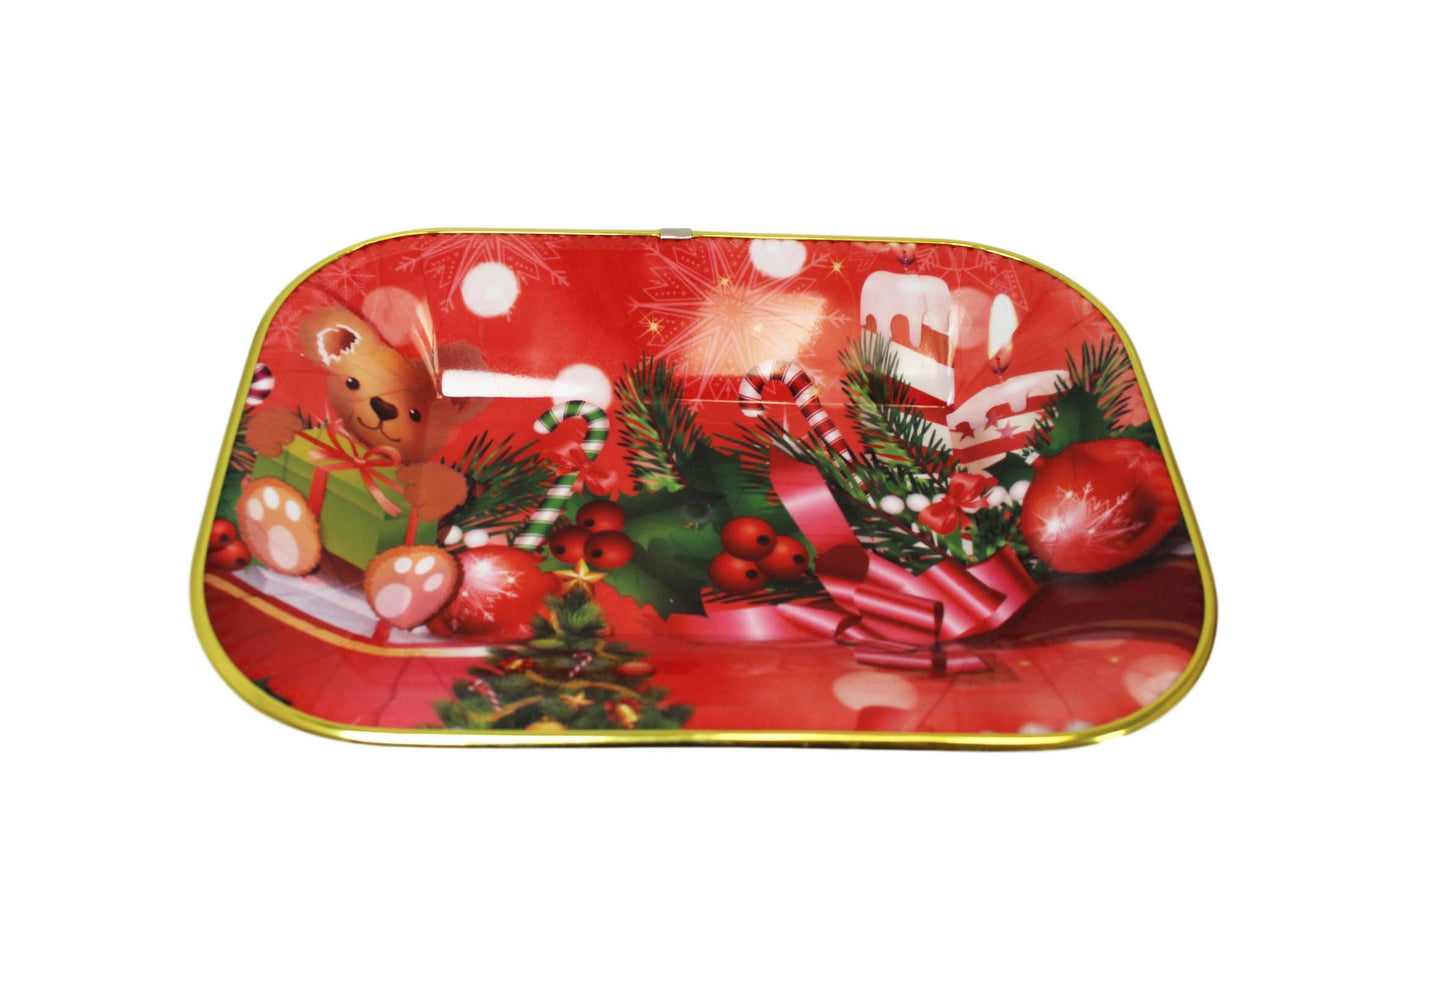 Christmas Festive Serving Tray Red Xmas Print Plastic Serving Gold Rim Tray 30 x 23 cm 6119 (Parcel Rate)